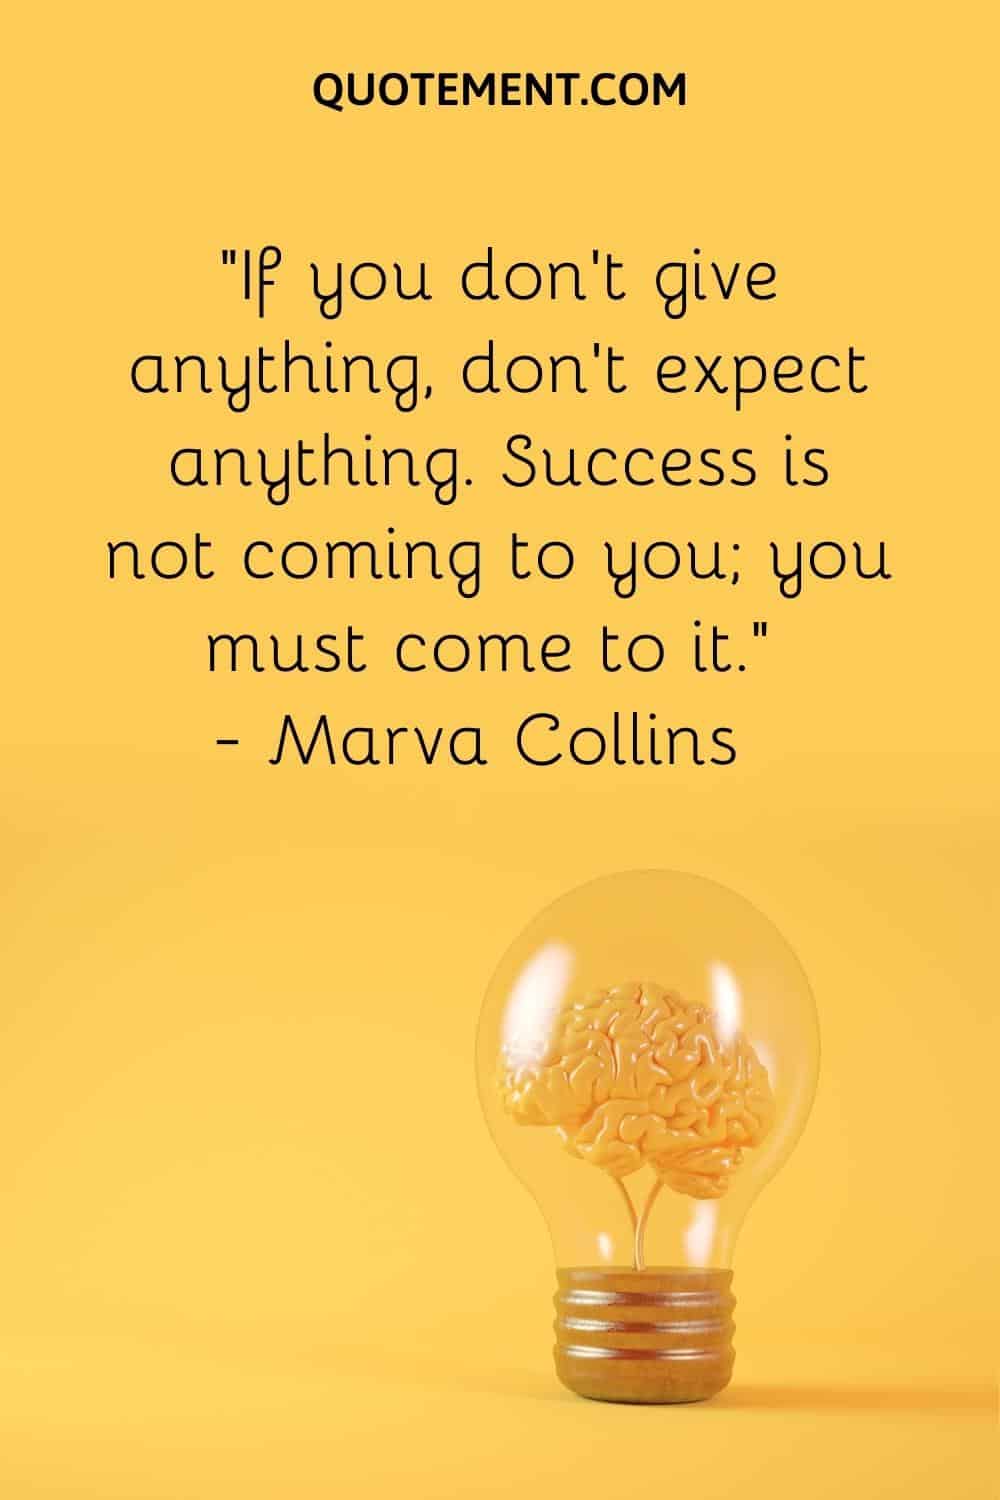 “If you don’t give anything, don’t expect anything. Success is not coming to you; you must come to it.” — Marva Collins